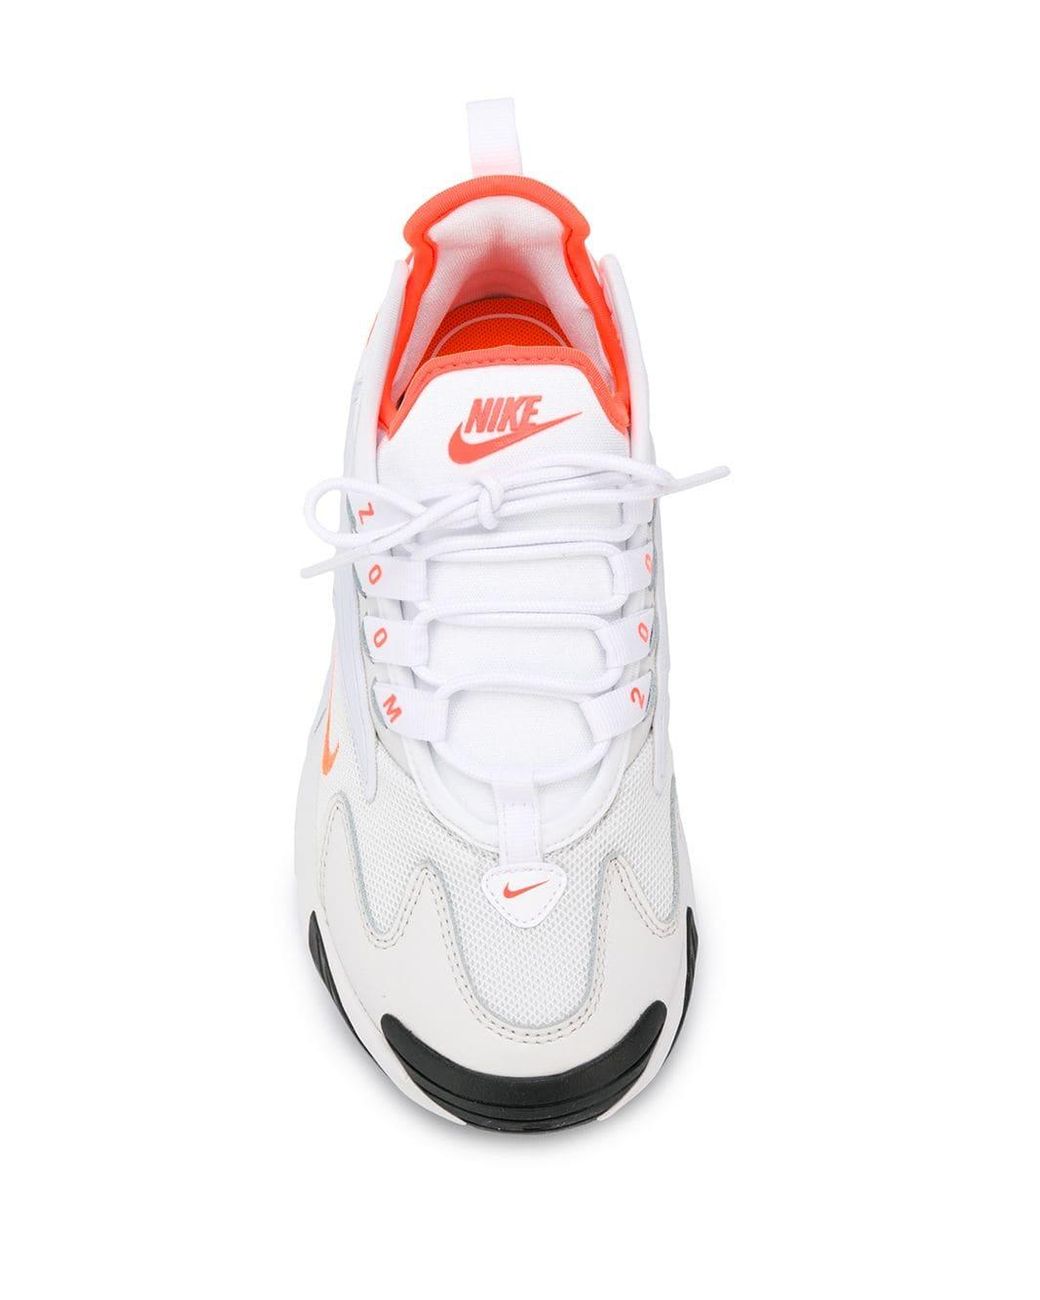 Nike Leather Off-white And Orange Zoom 2k Sneakers | Lyst Australia